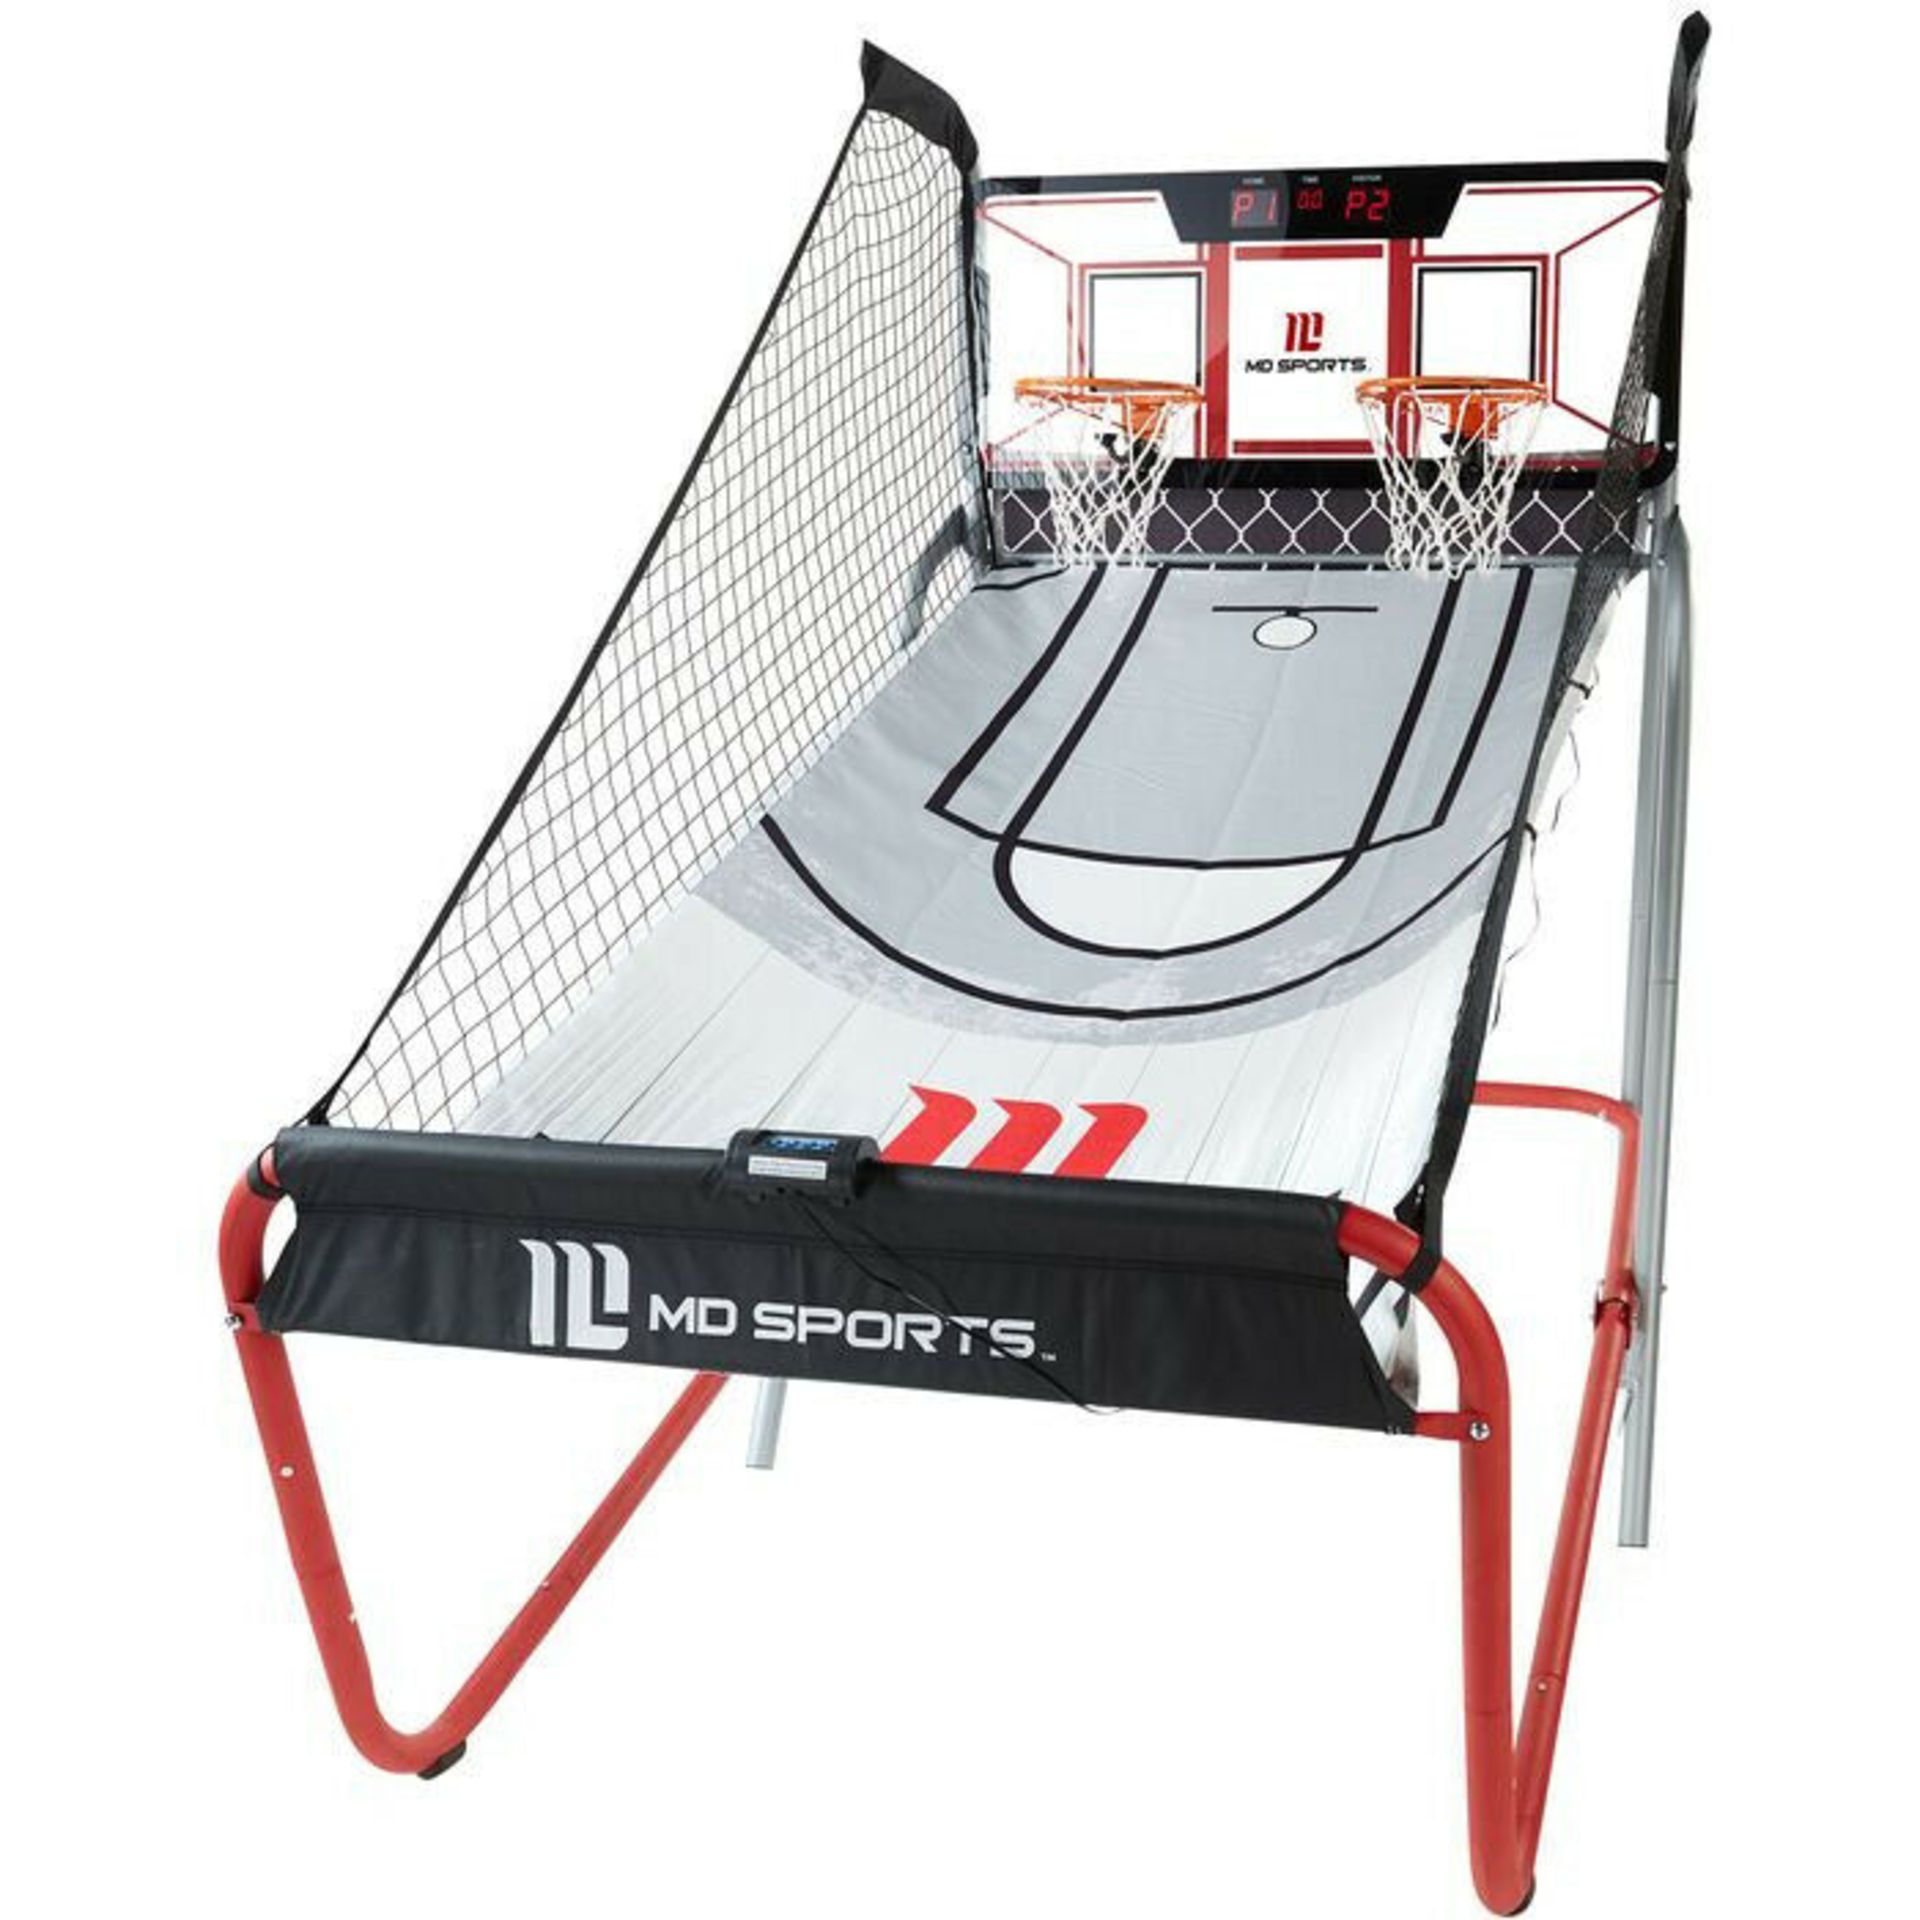 1 MD SPORTS PRO COURT 7FT 2 PLAYER BASKETBALL GAME RRP Â£179.99